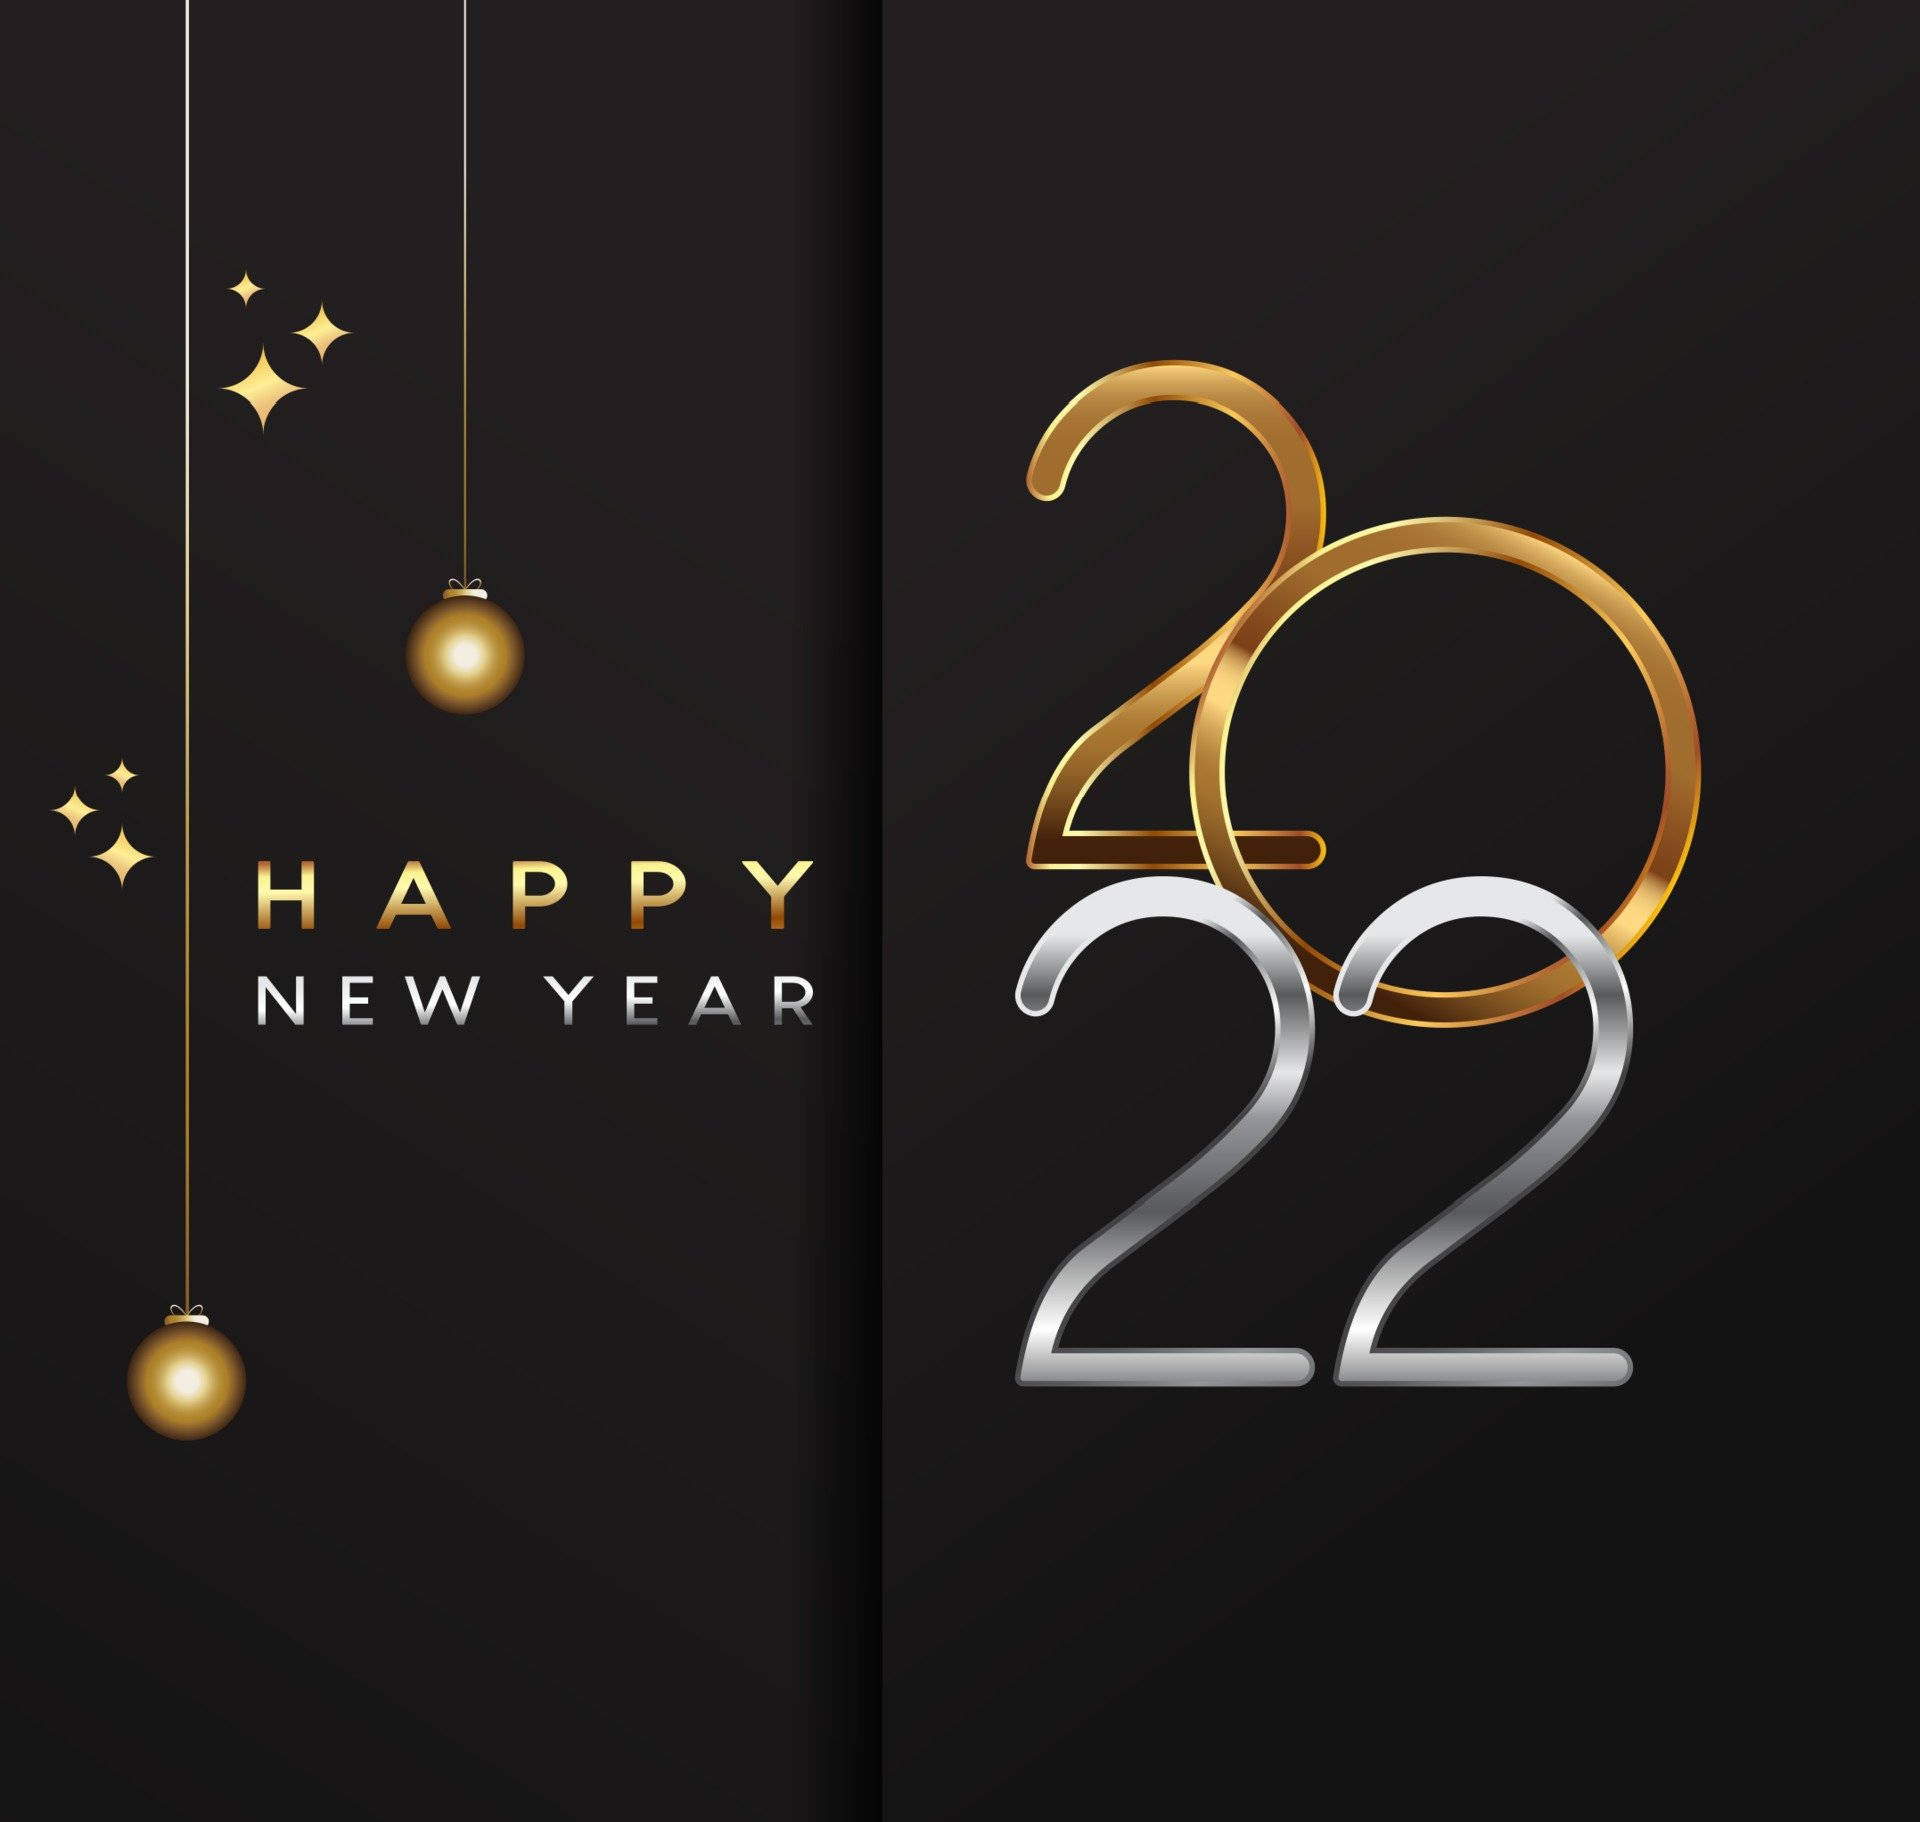 Happy New Year 2022 Black And Gold